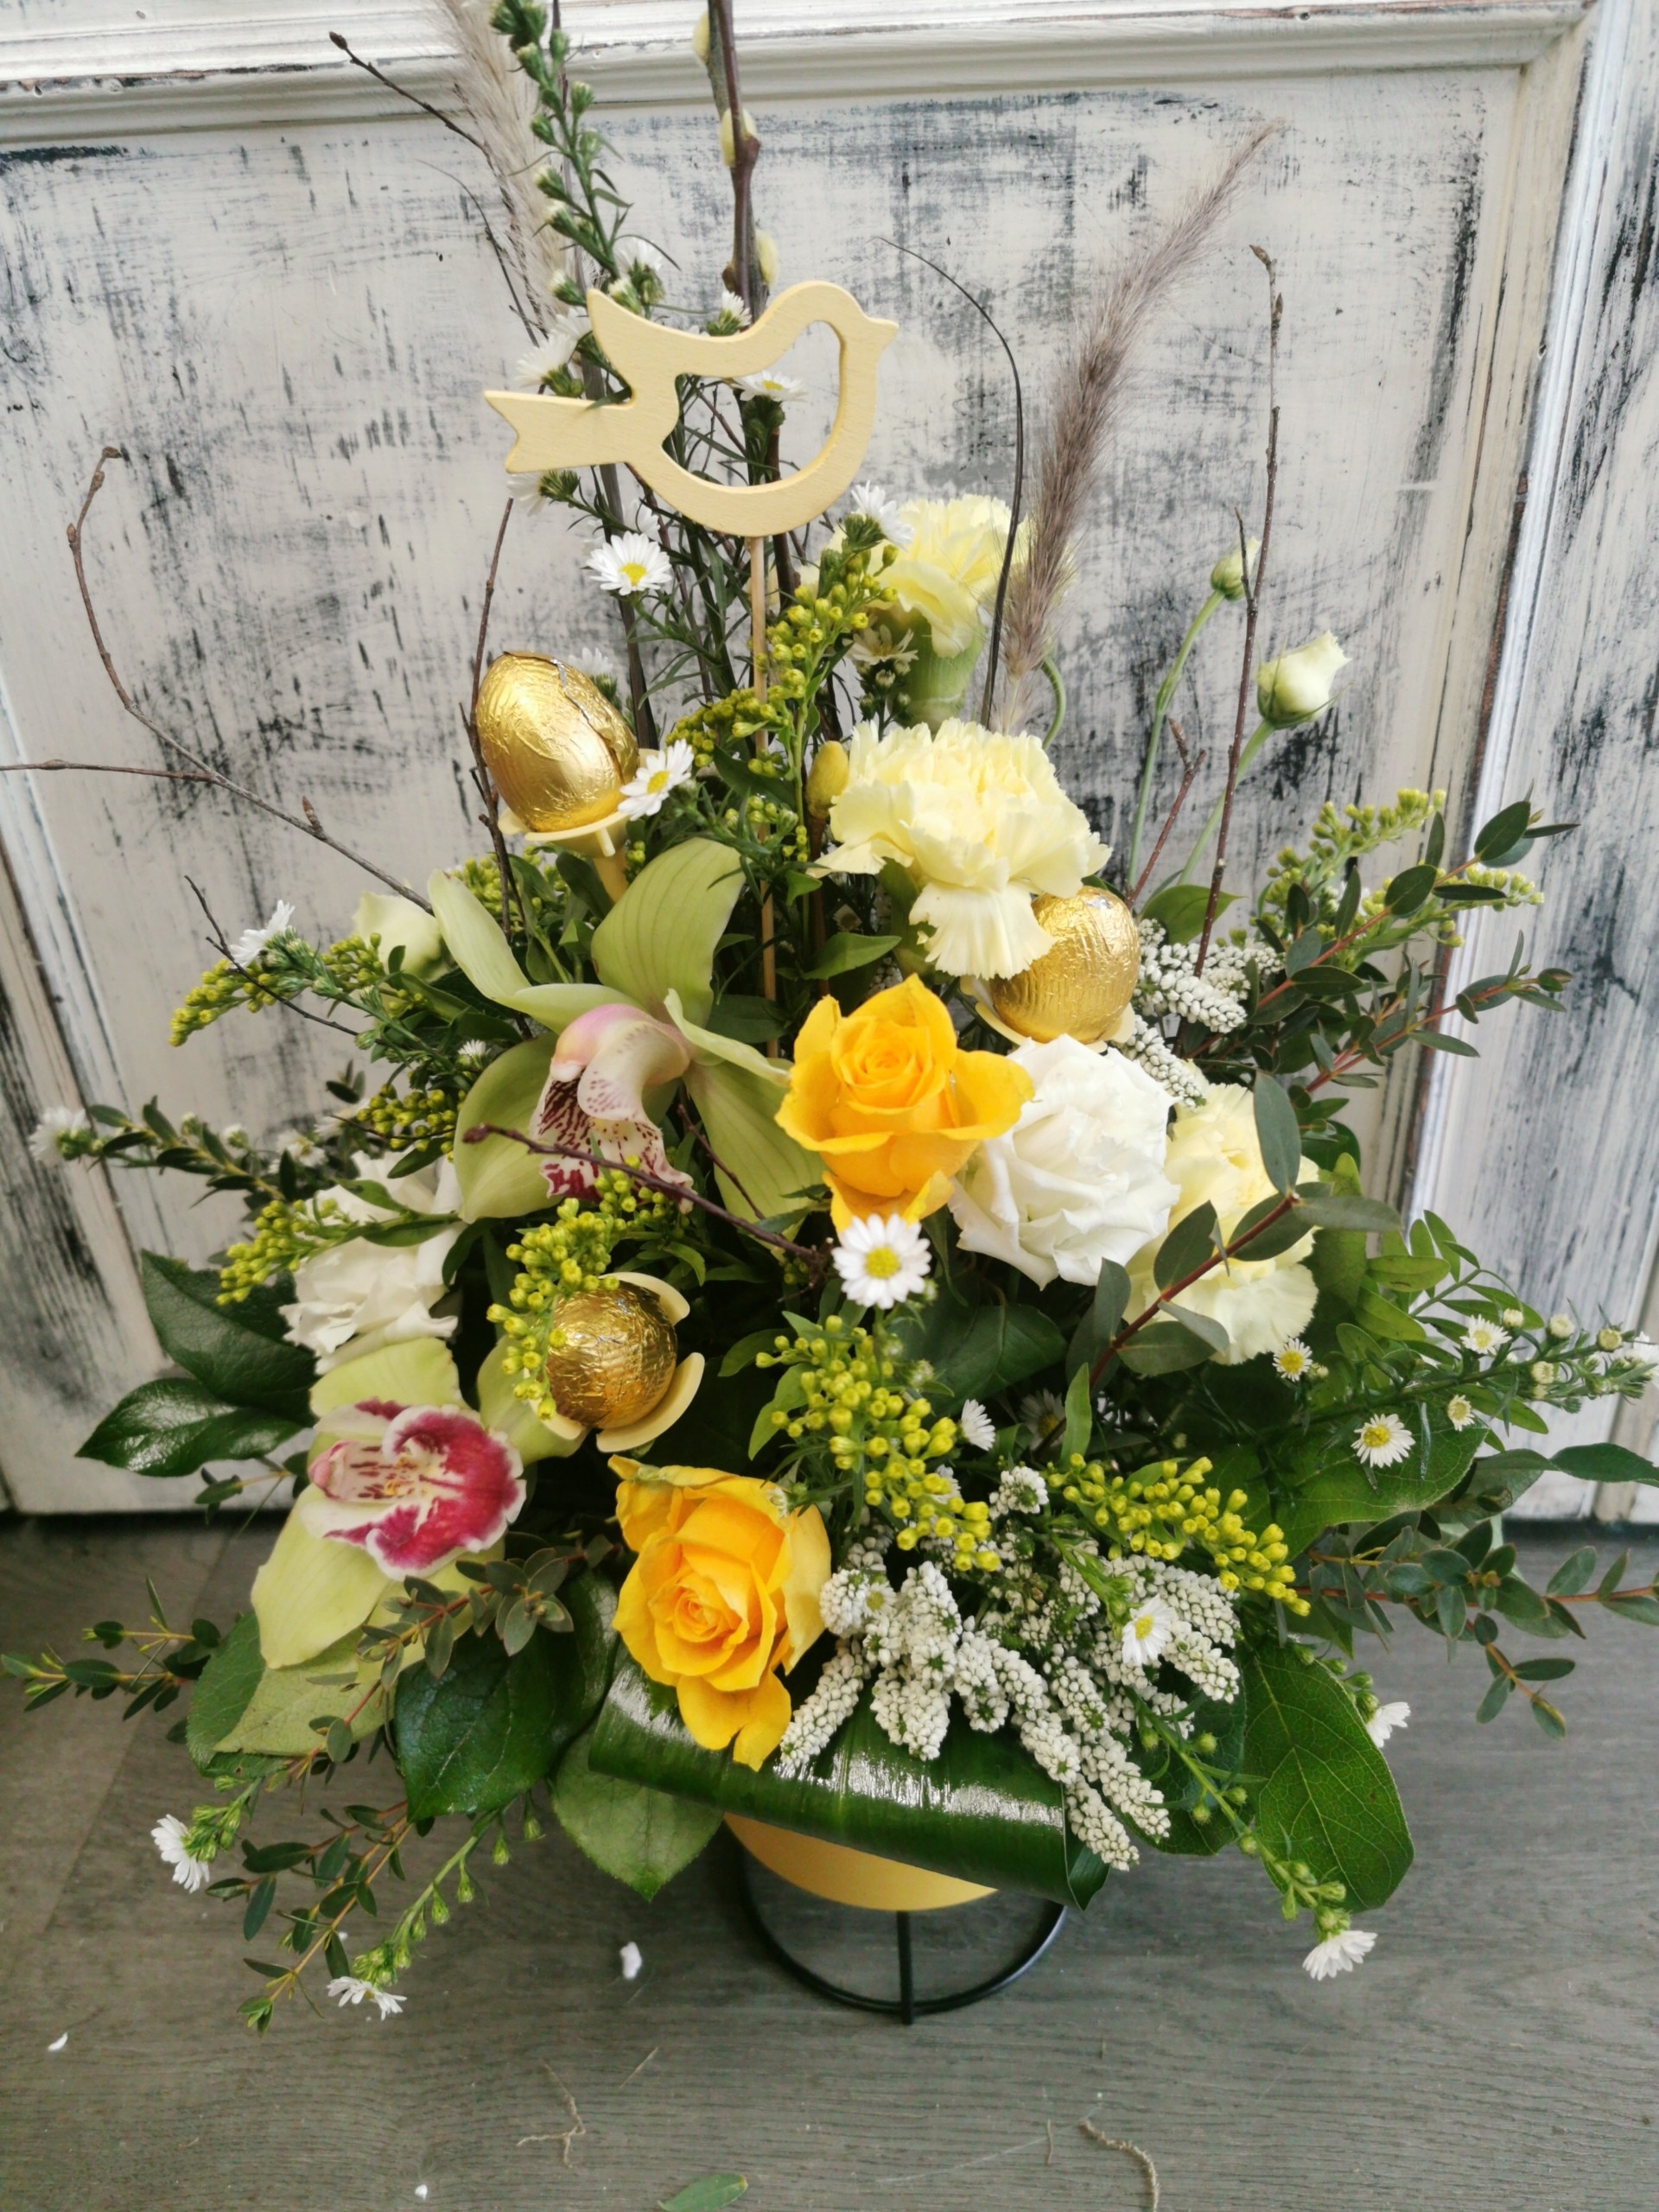 Yellow and White Arrangement with Chocolate Eggs Flower Arrangement